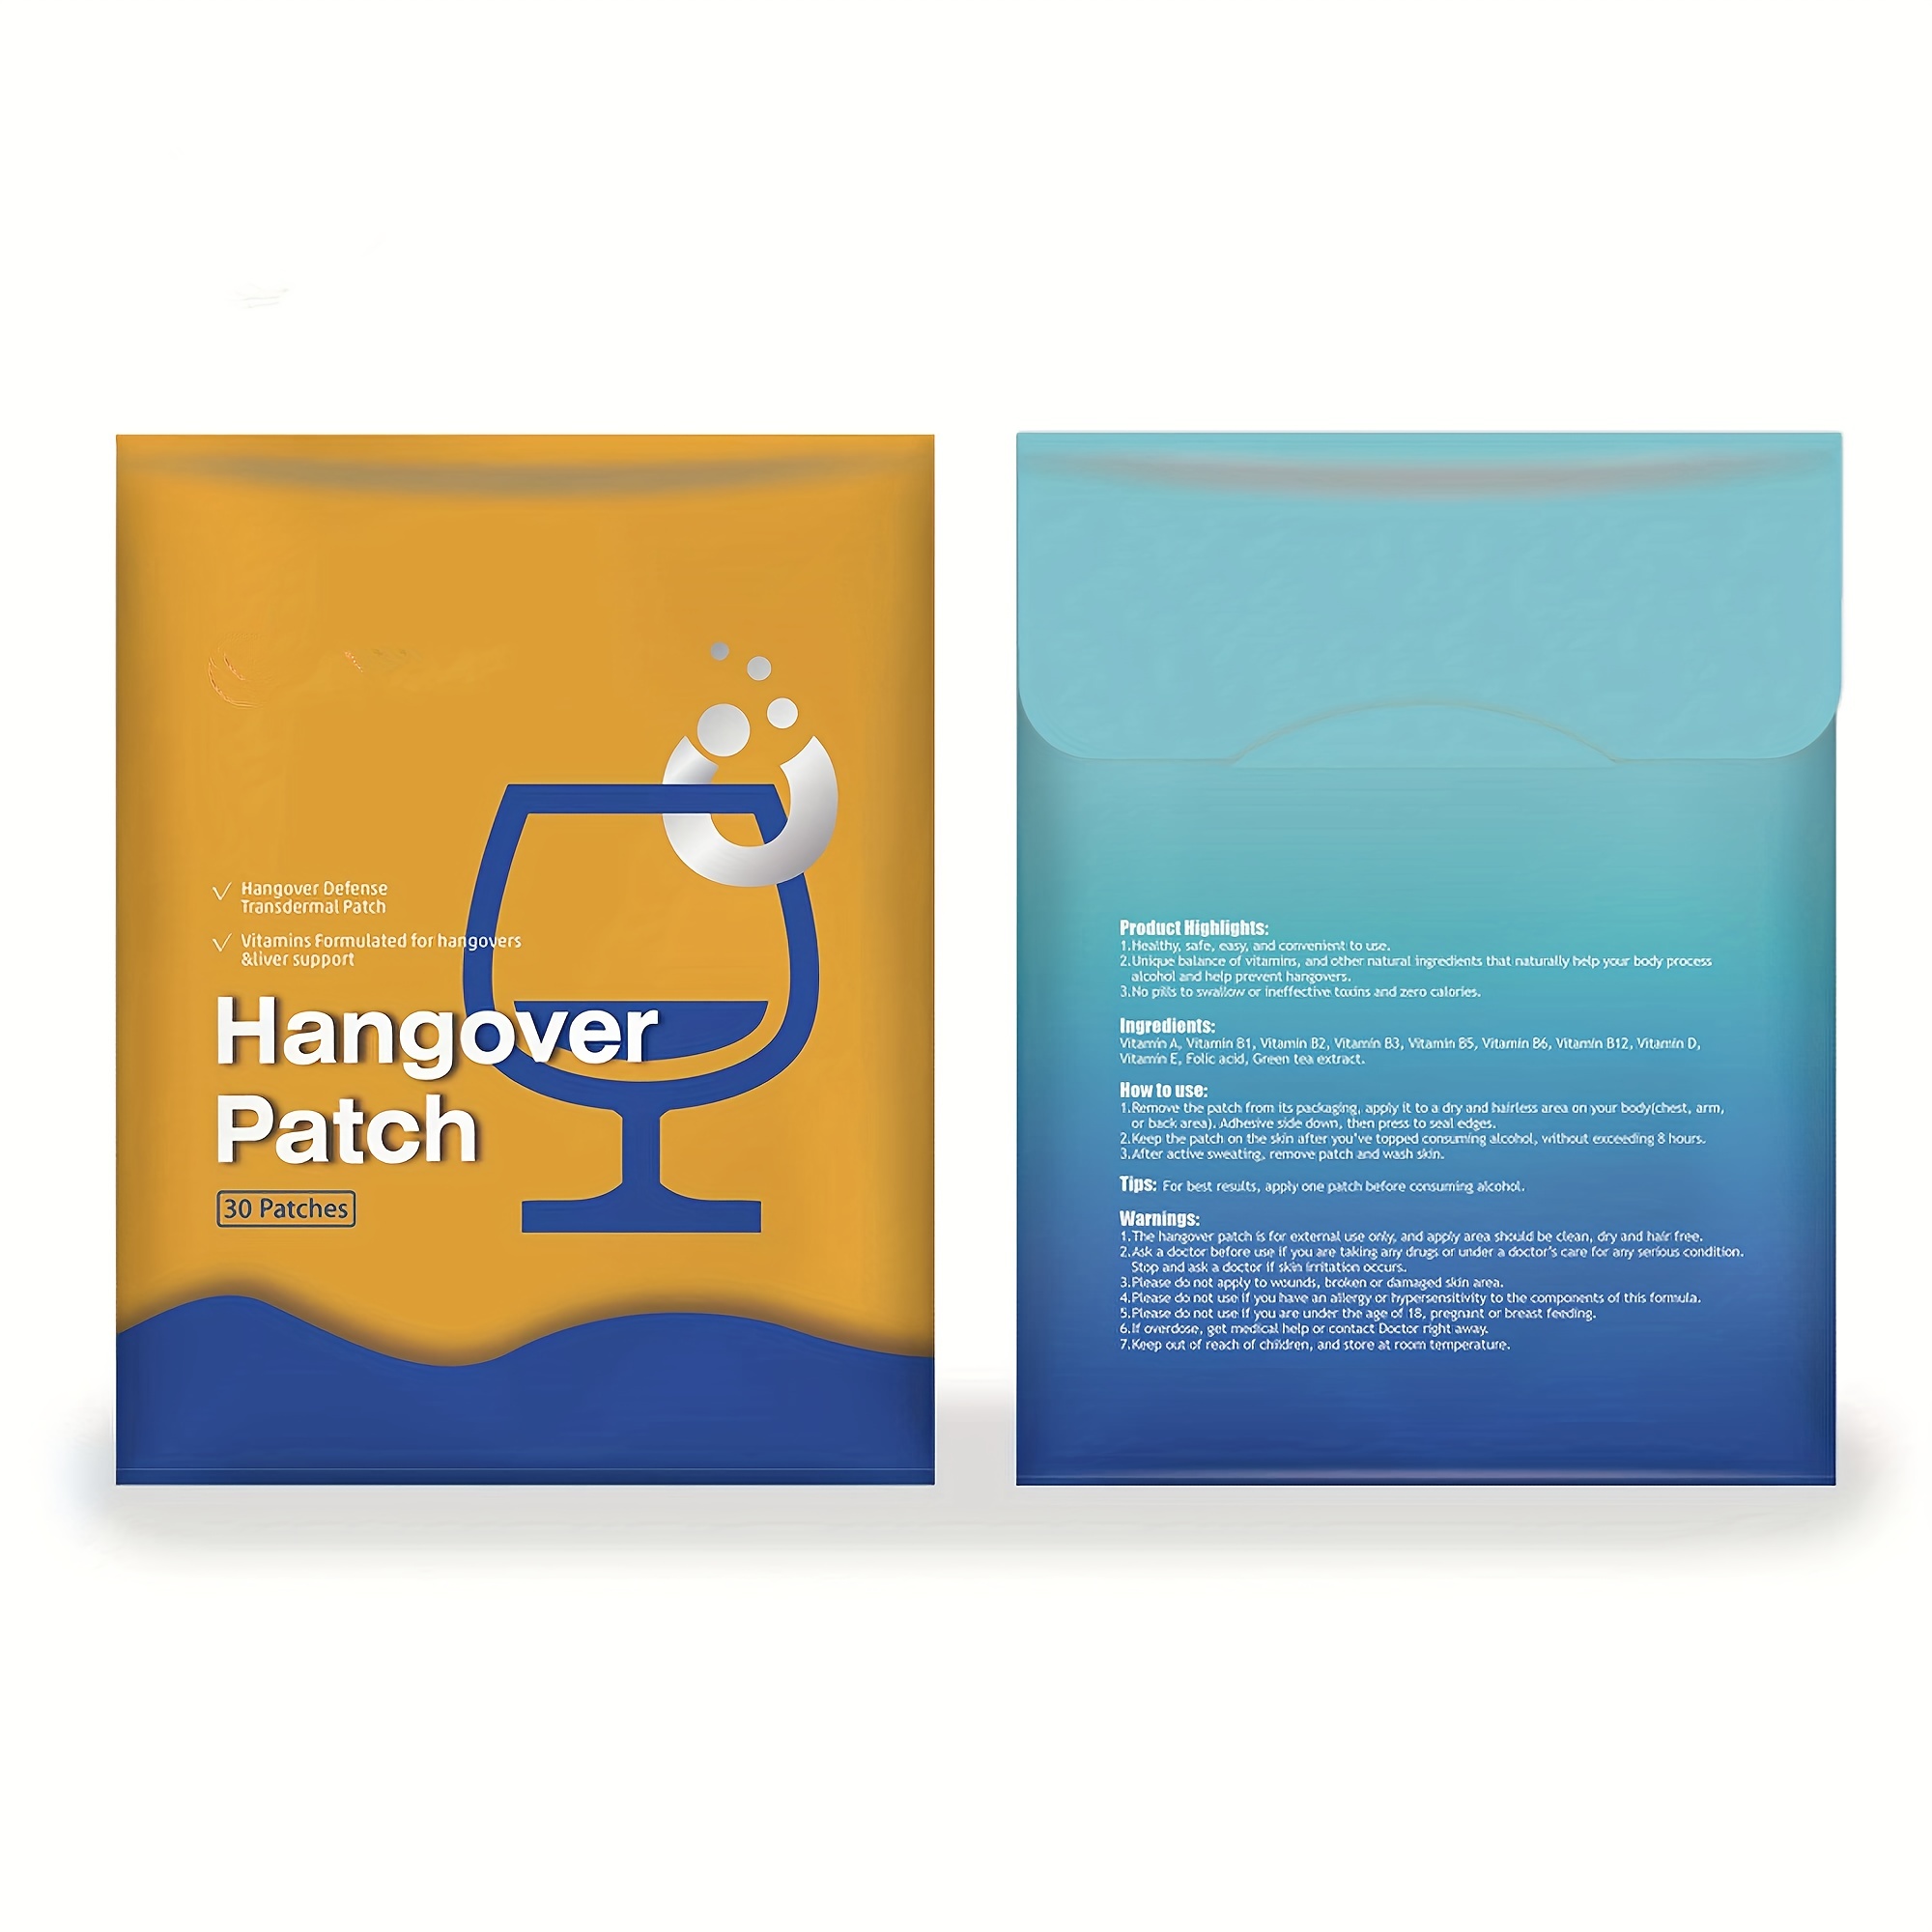 The Hangover Patch - Australia's Online Store